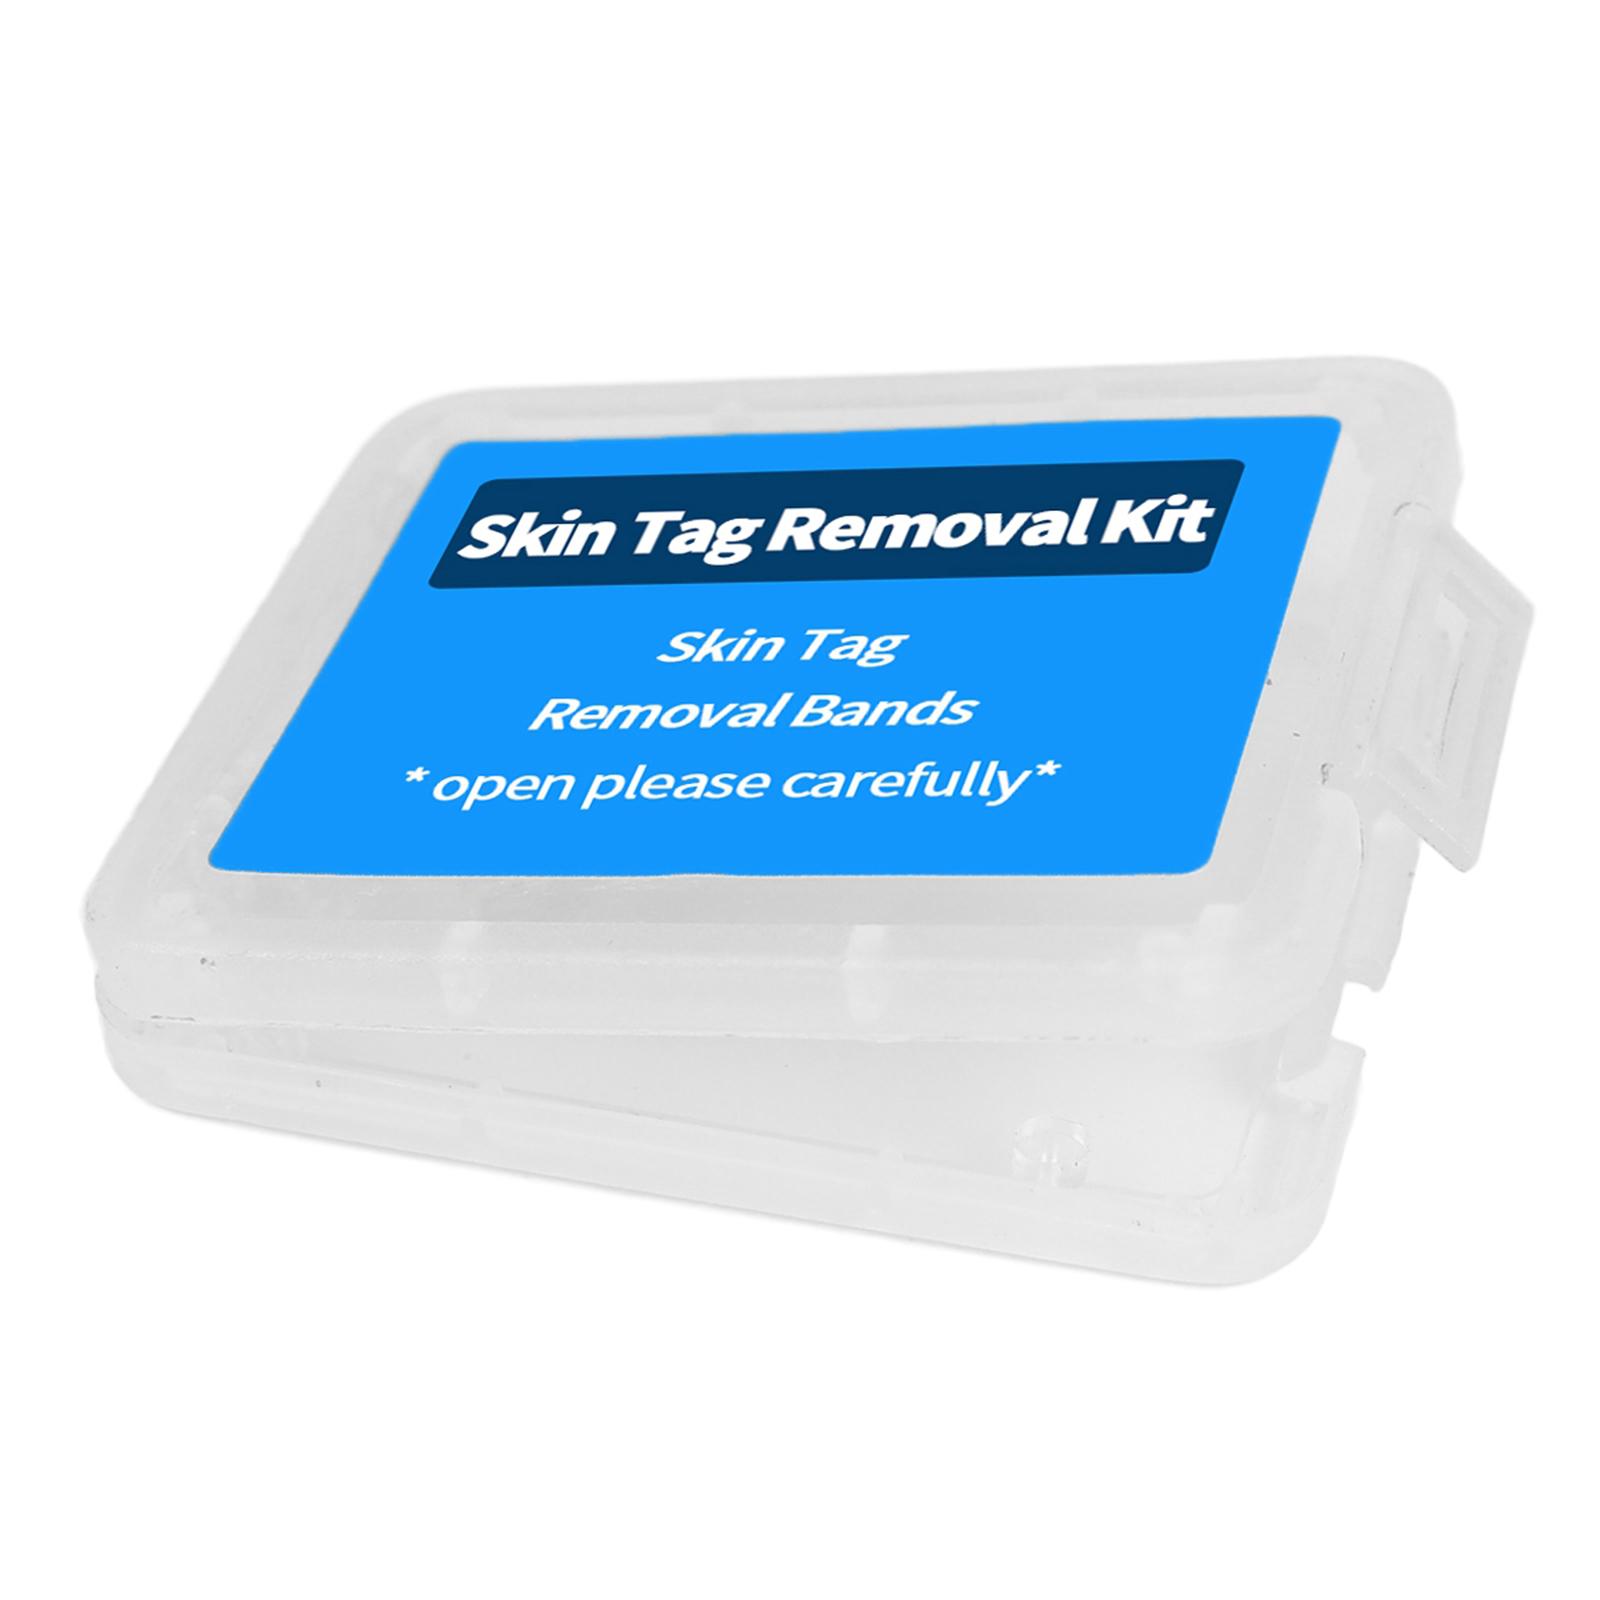 Safe Skin Tag Removal Kit Wart Tag Skin Removal with Extra Bands 50x Bands